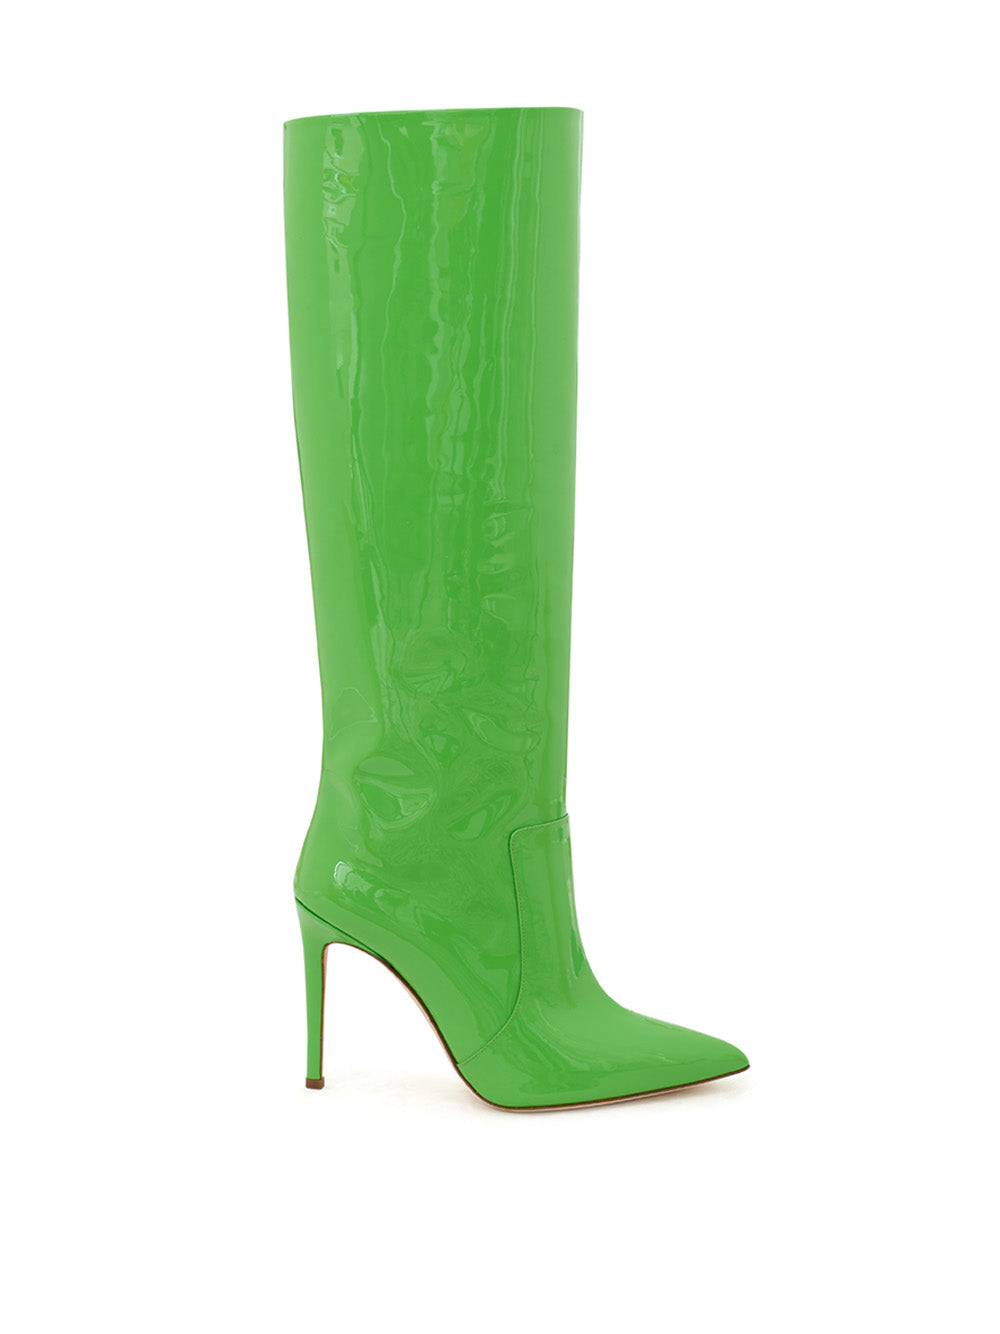 Green Patent Leather Boot